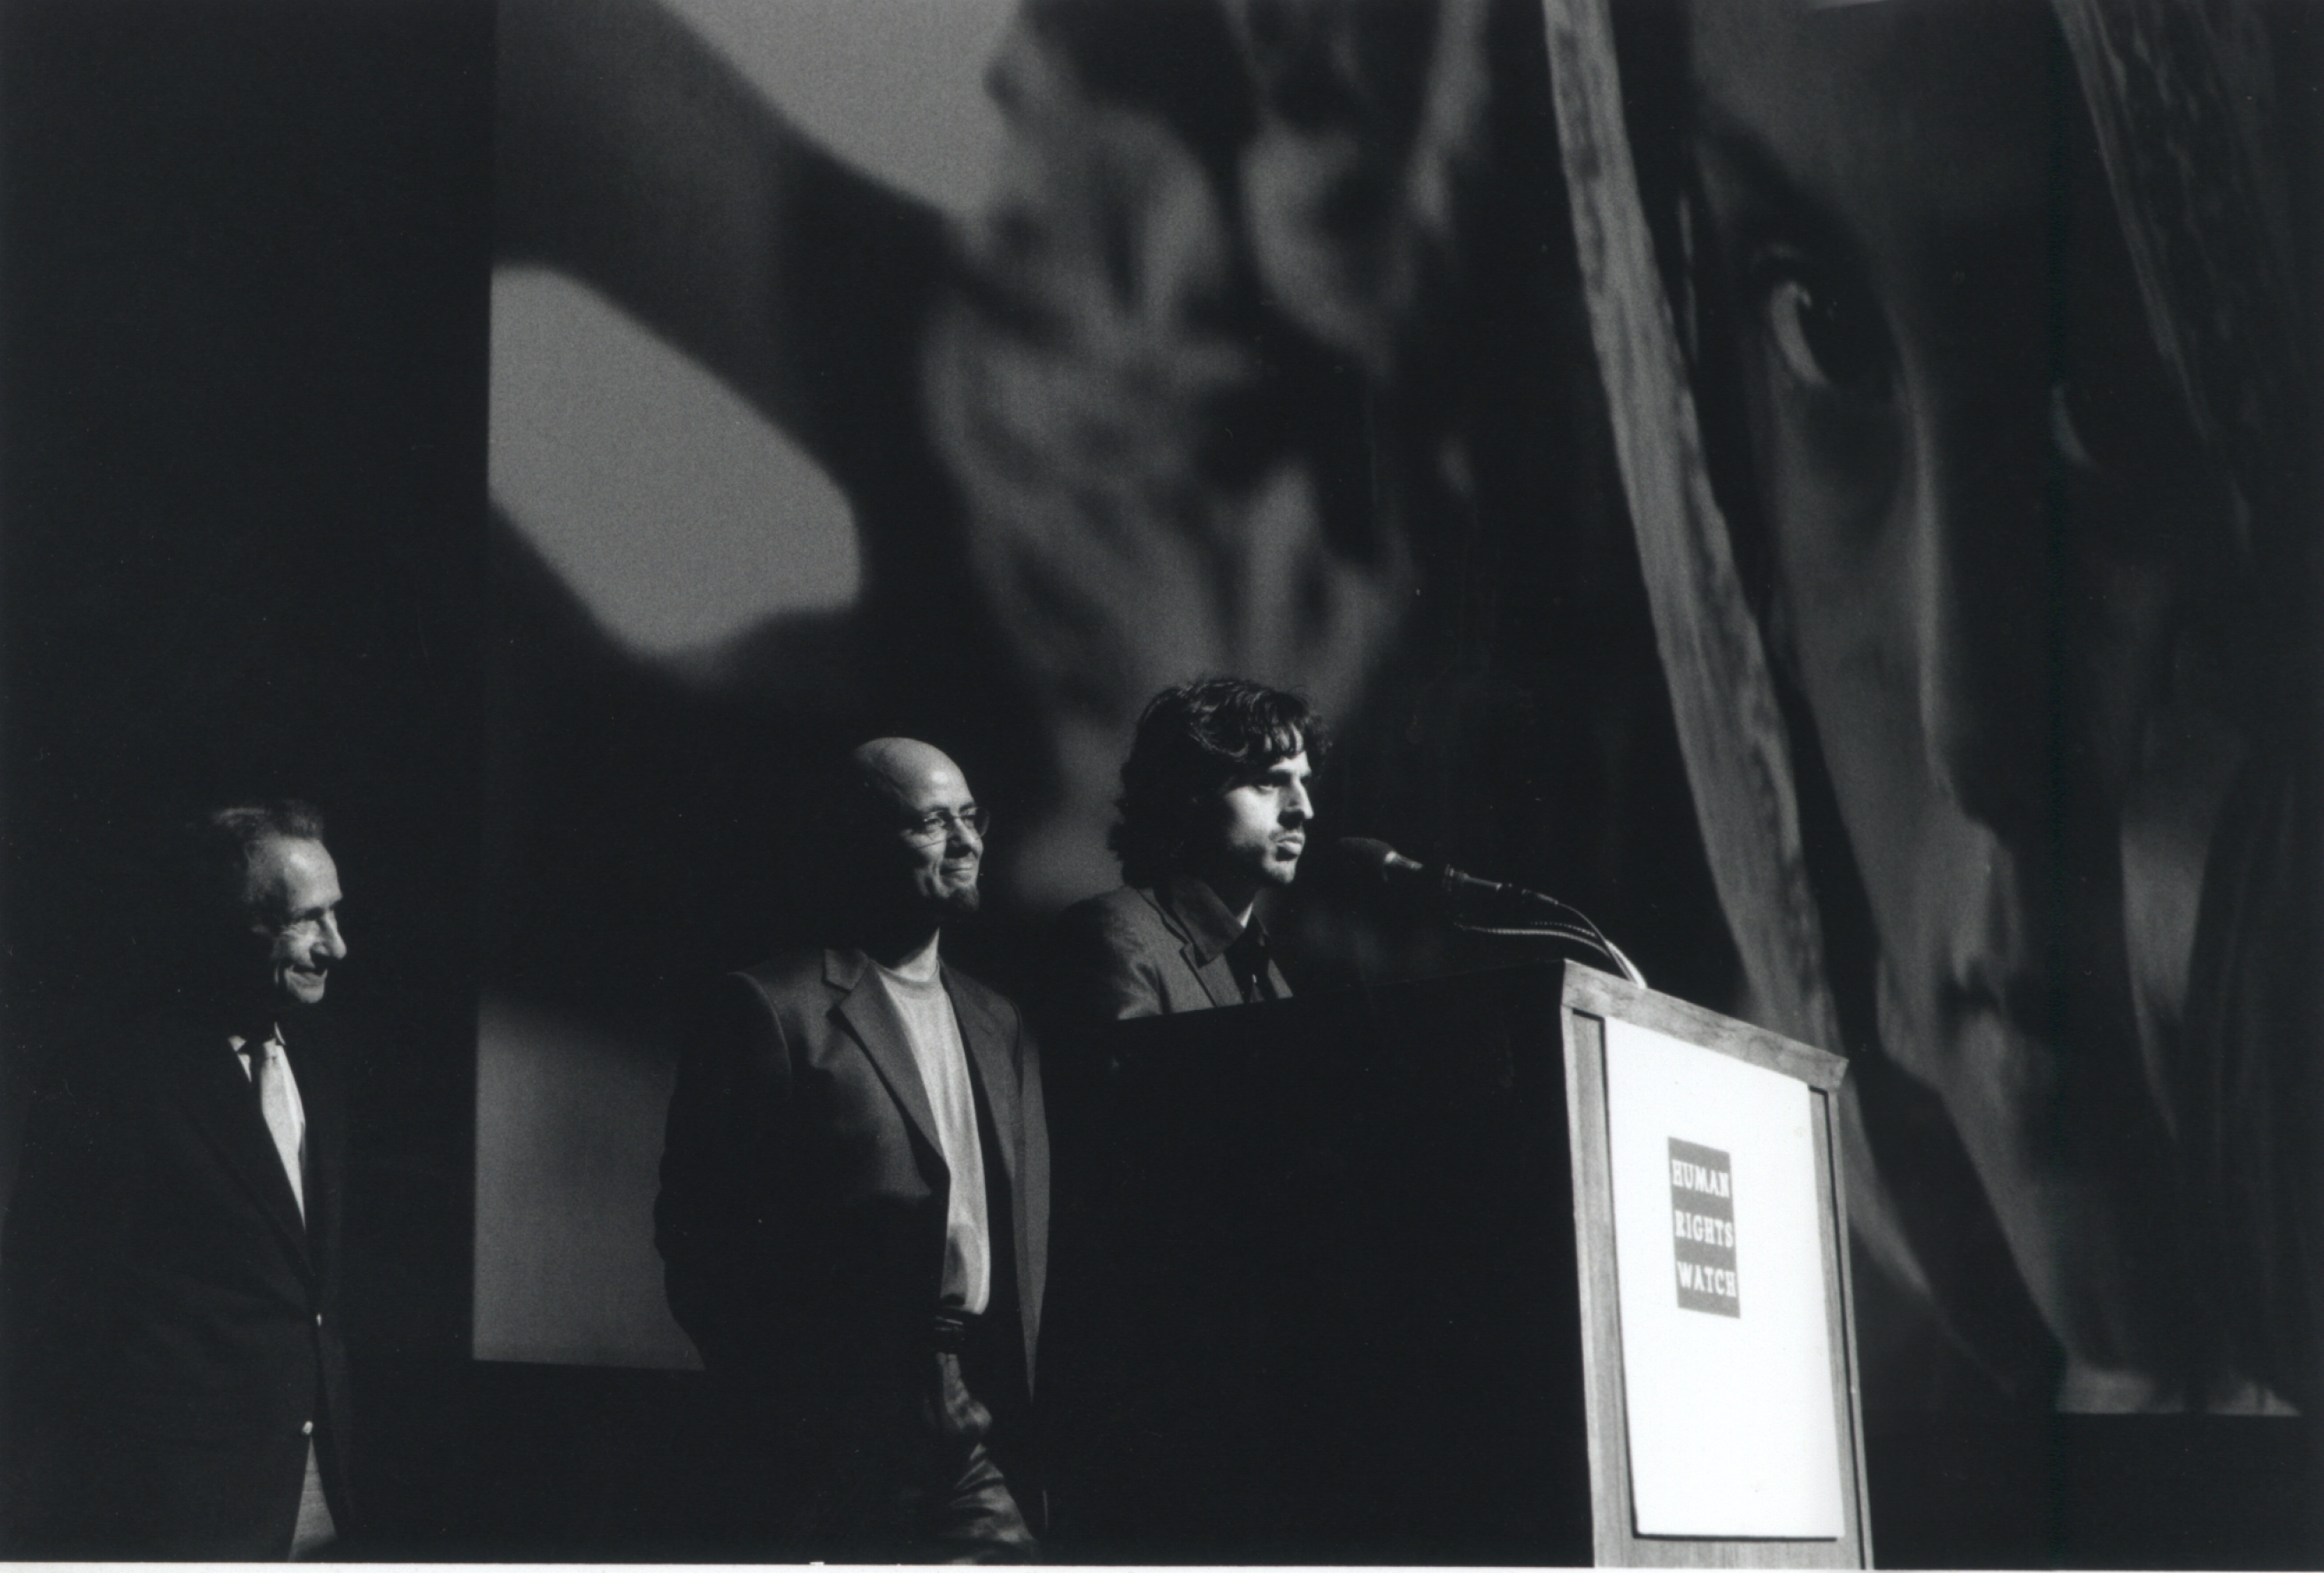 Arthur Penn (left) presents to Giuseppe Petitto (right) the Human rights Watch Nestor Almendros Award for courage and commitment in human rights filmmaking. Lincoln Centre, New York